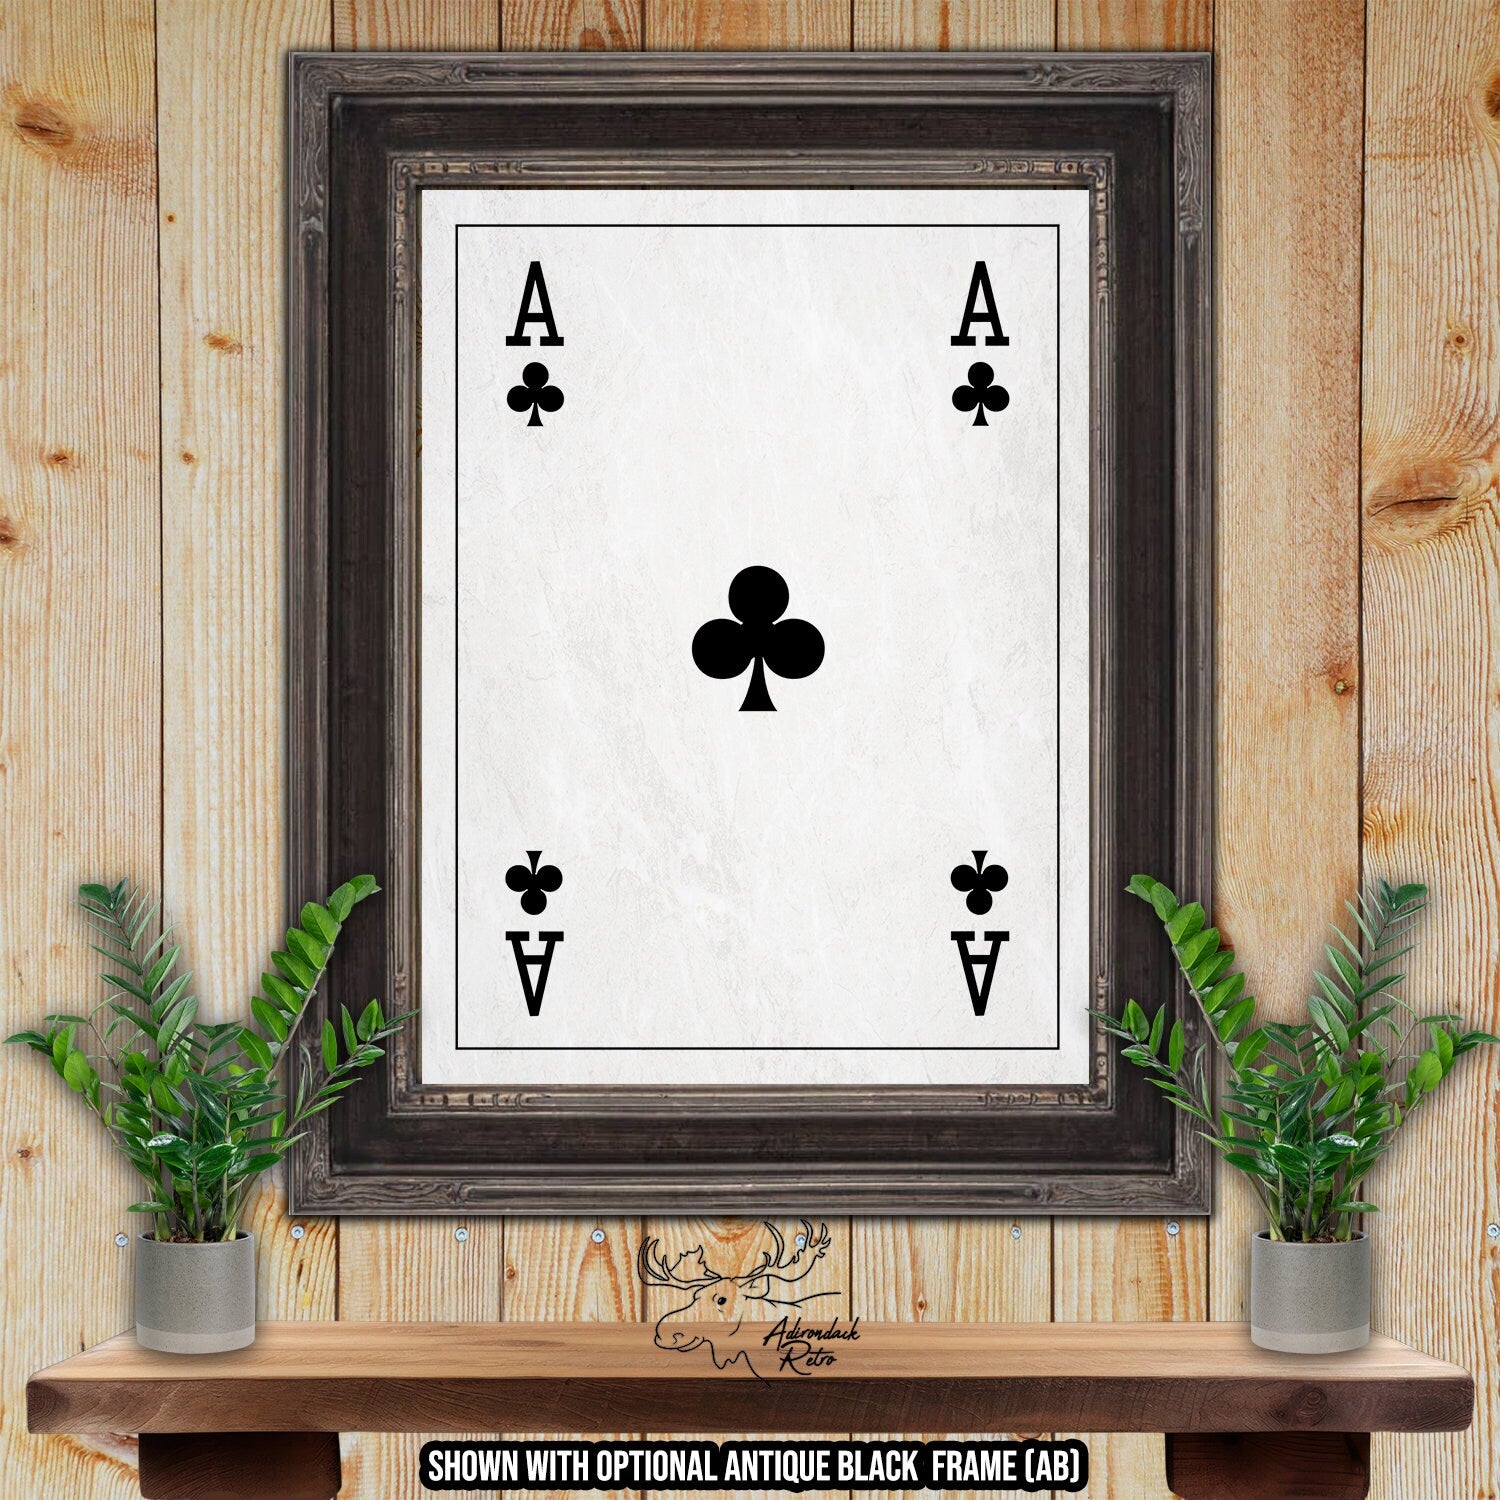 Ace of Clubs Playing Card Fine Art Print at Adirondack Retro